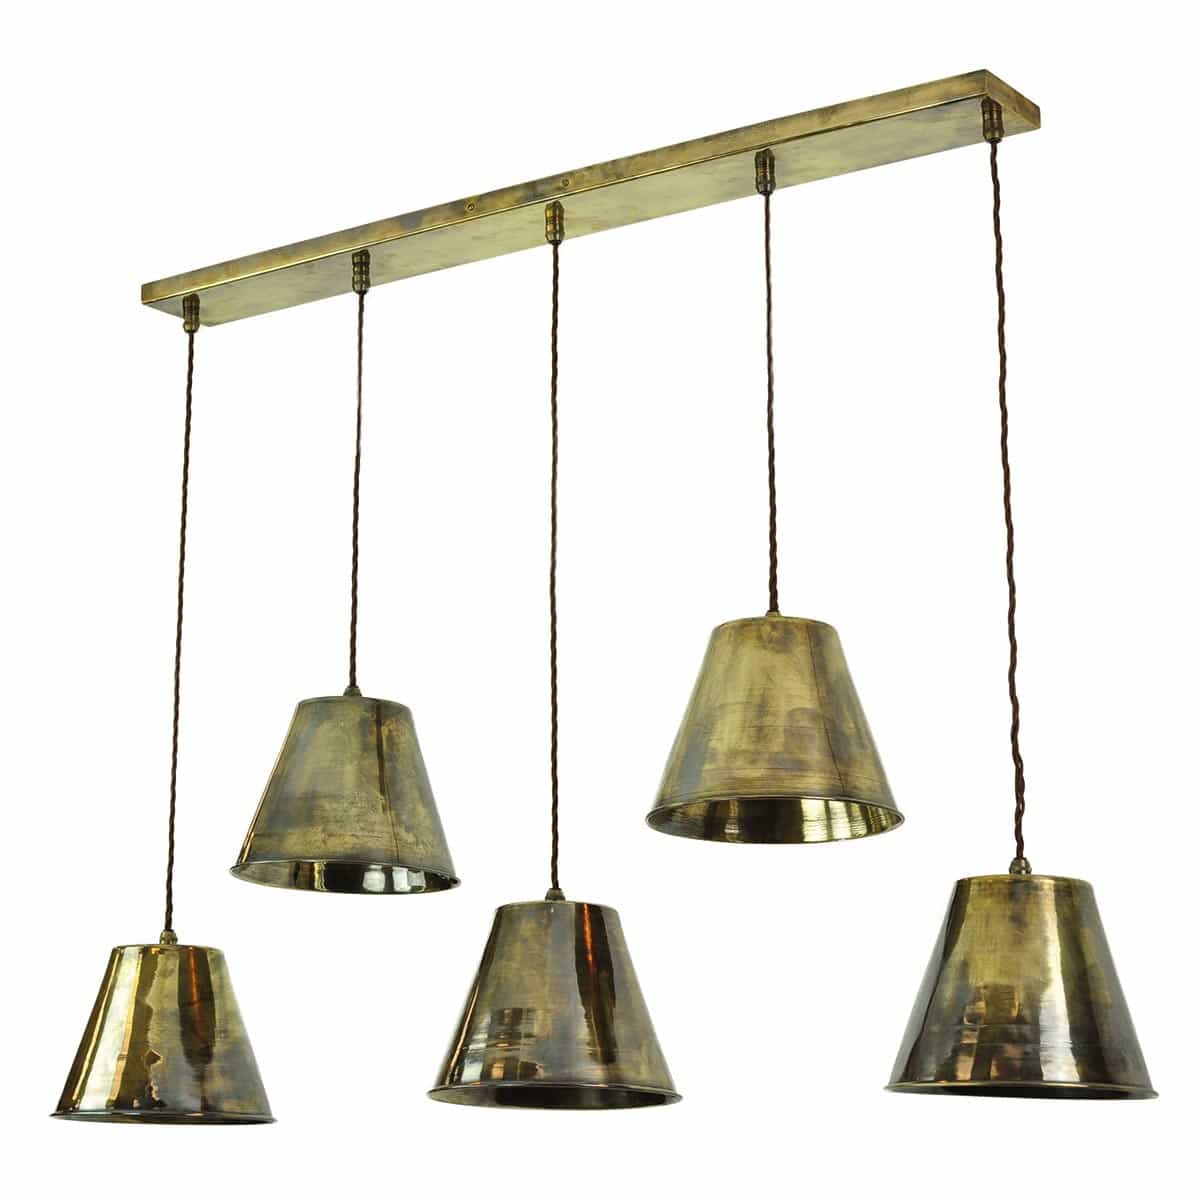 Map Room Nautical Style 5 Light Pendant Bar Solid Antique Brass